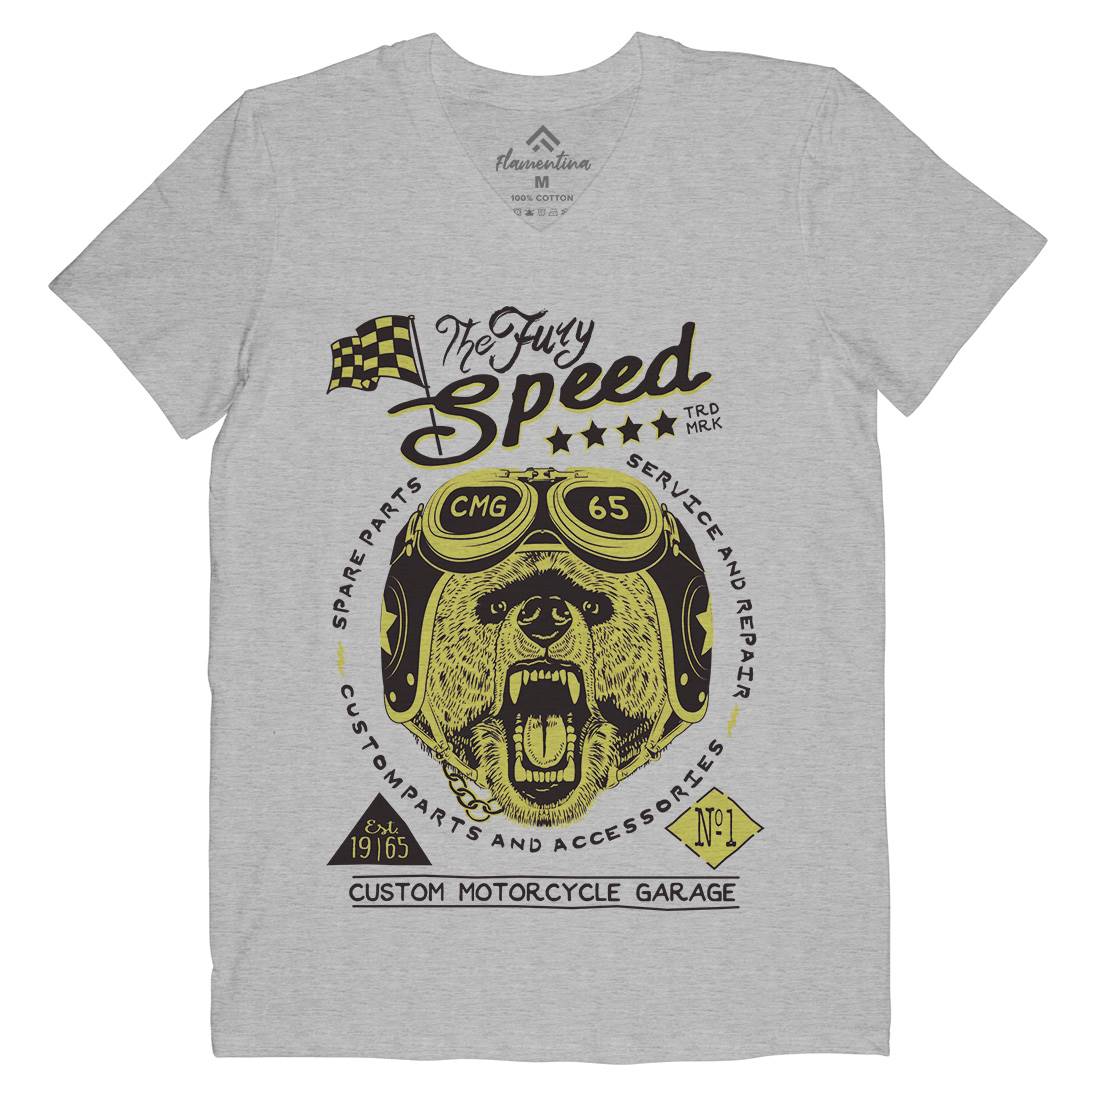 Fury Speed Mens V-Neck T-Shirt Motorcycles A997